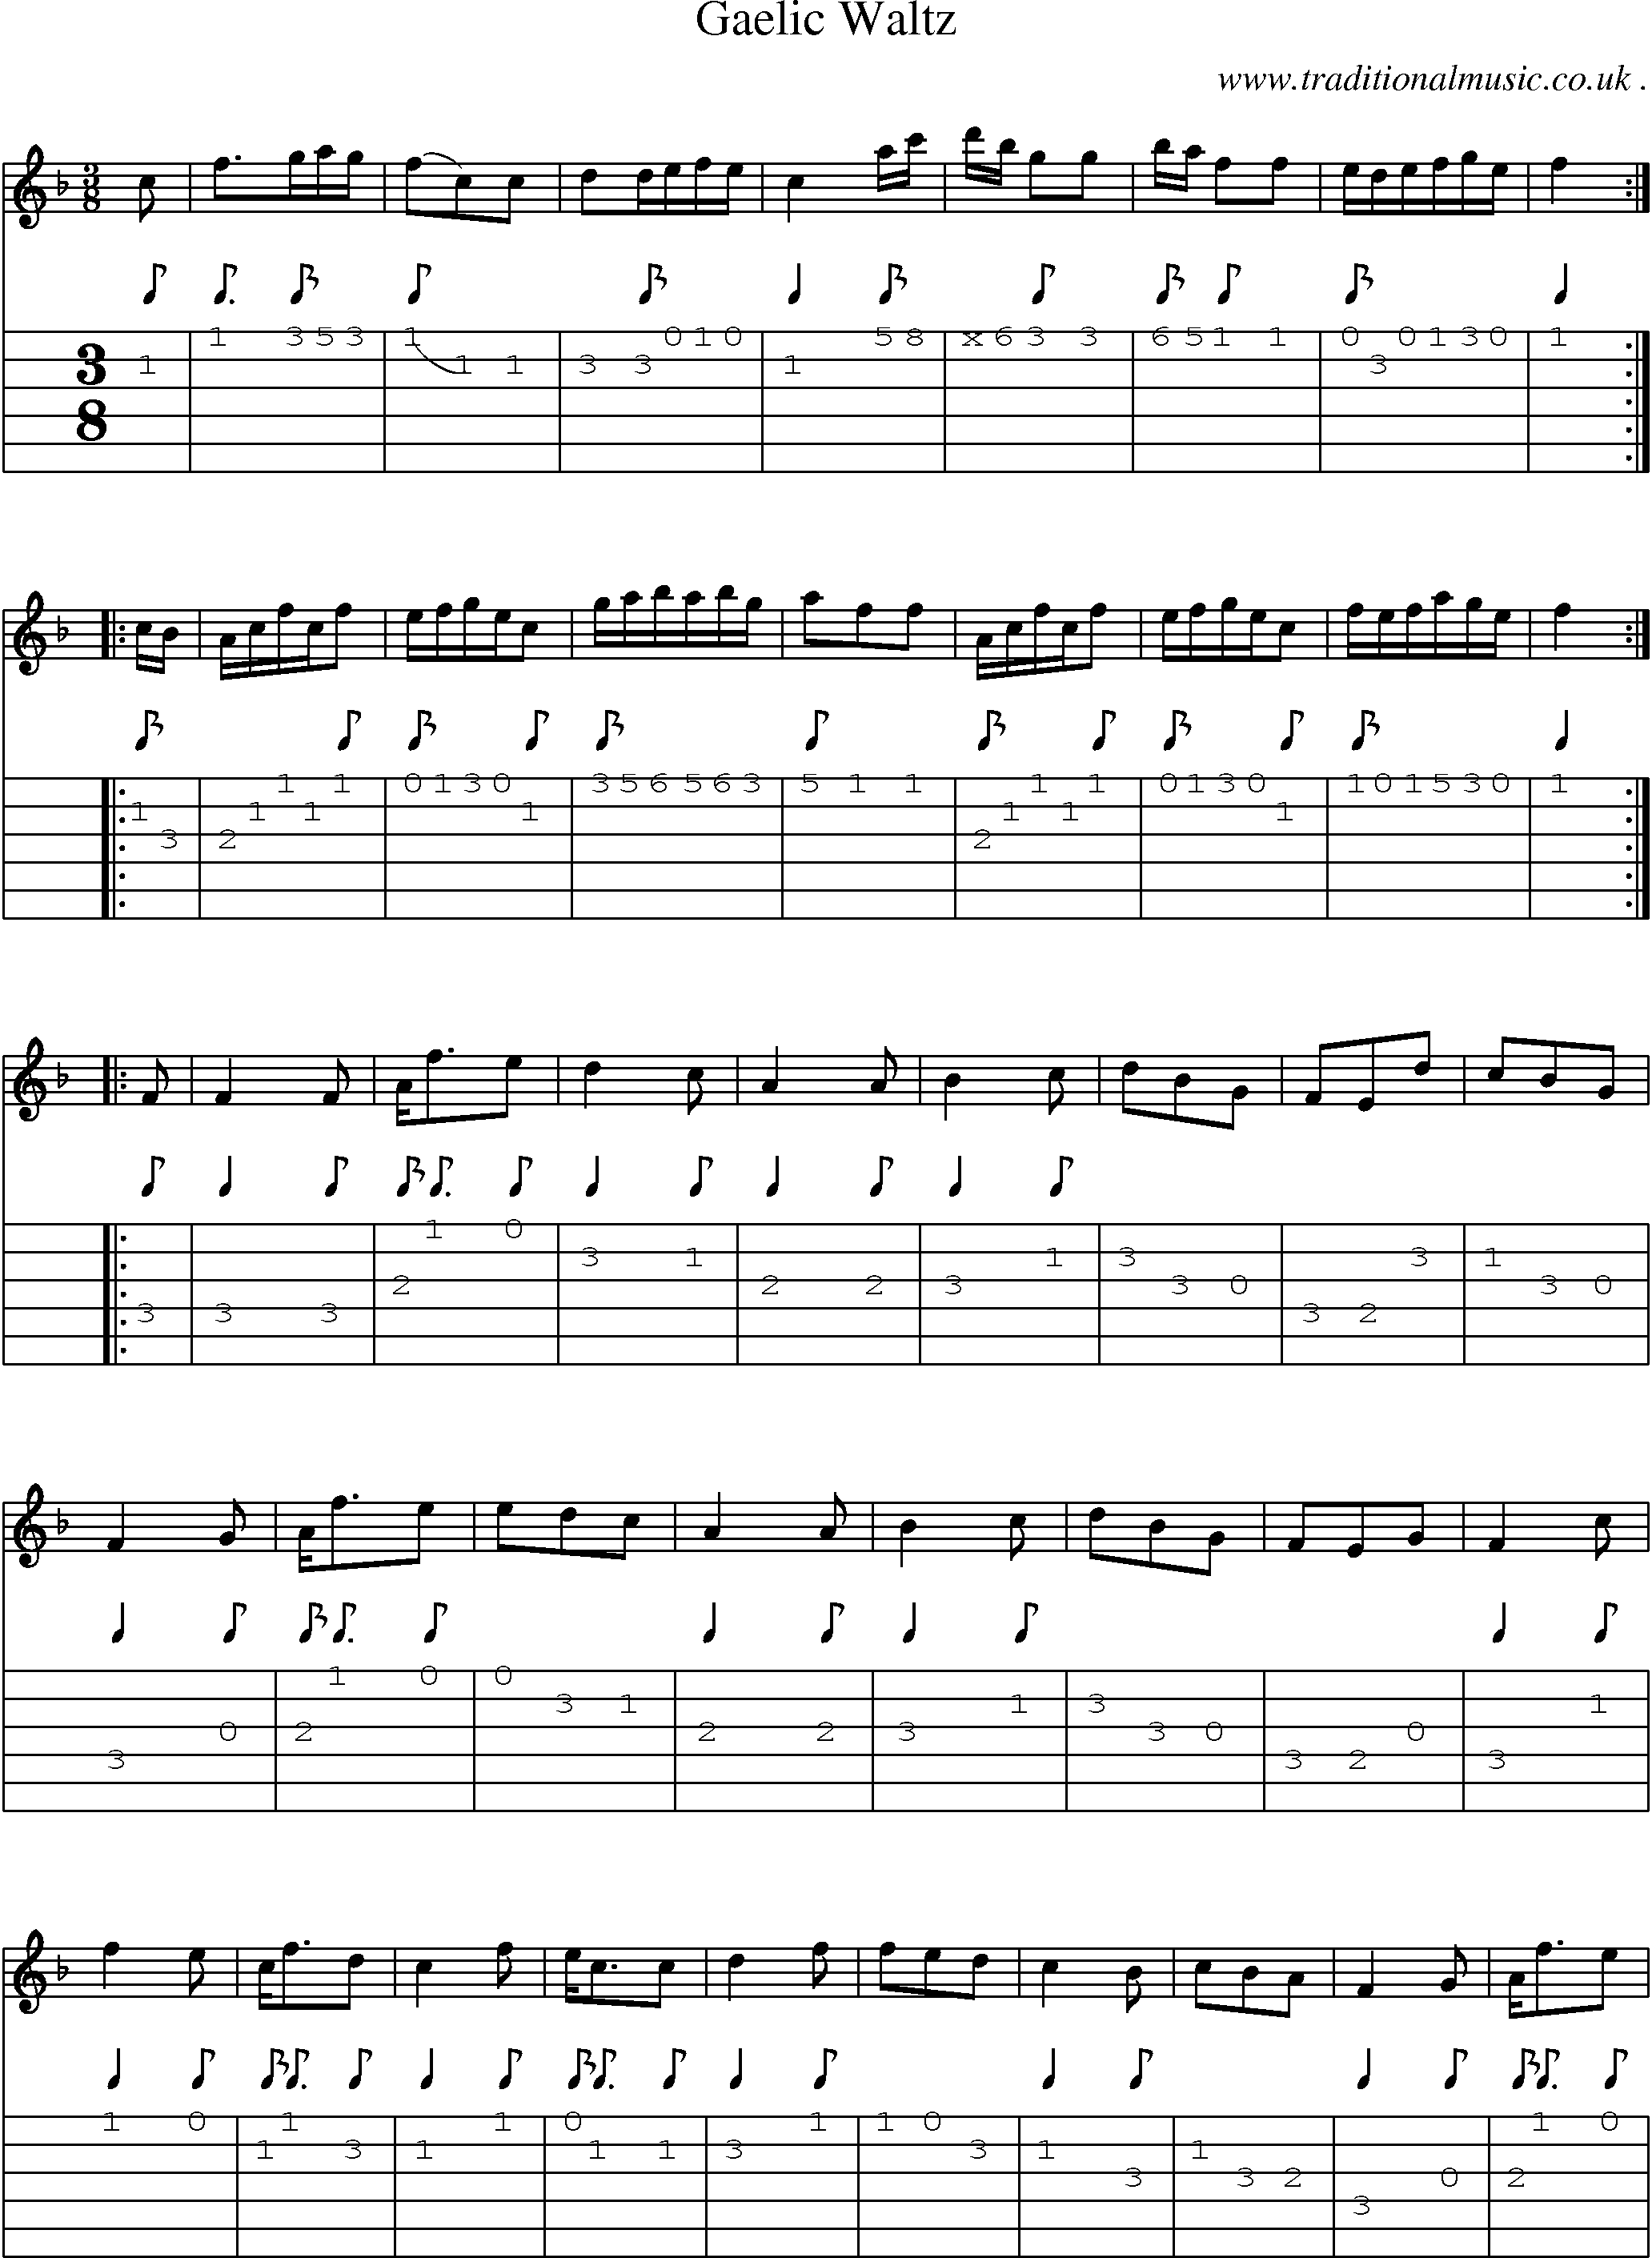 Sheet-Music and Guitar Tabs for Gaelic Waltz